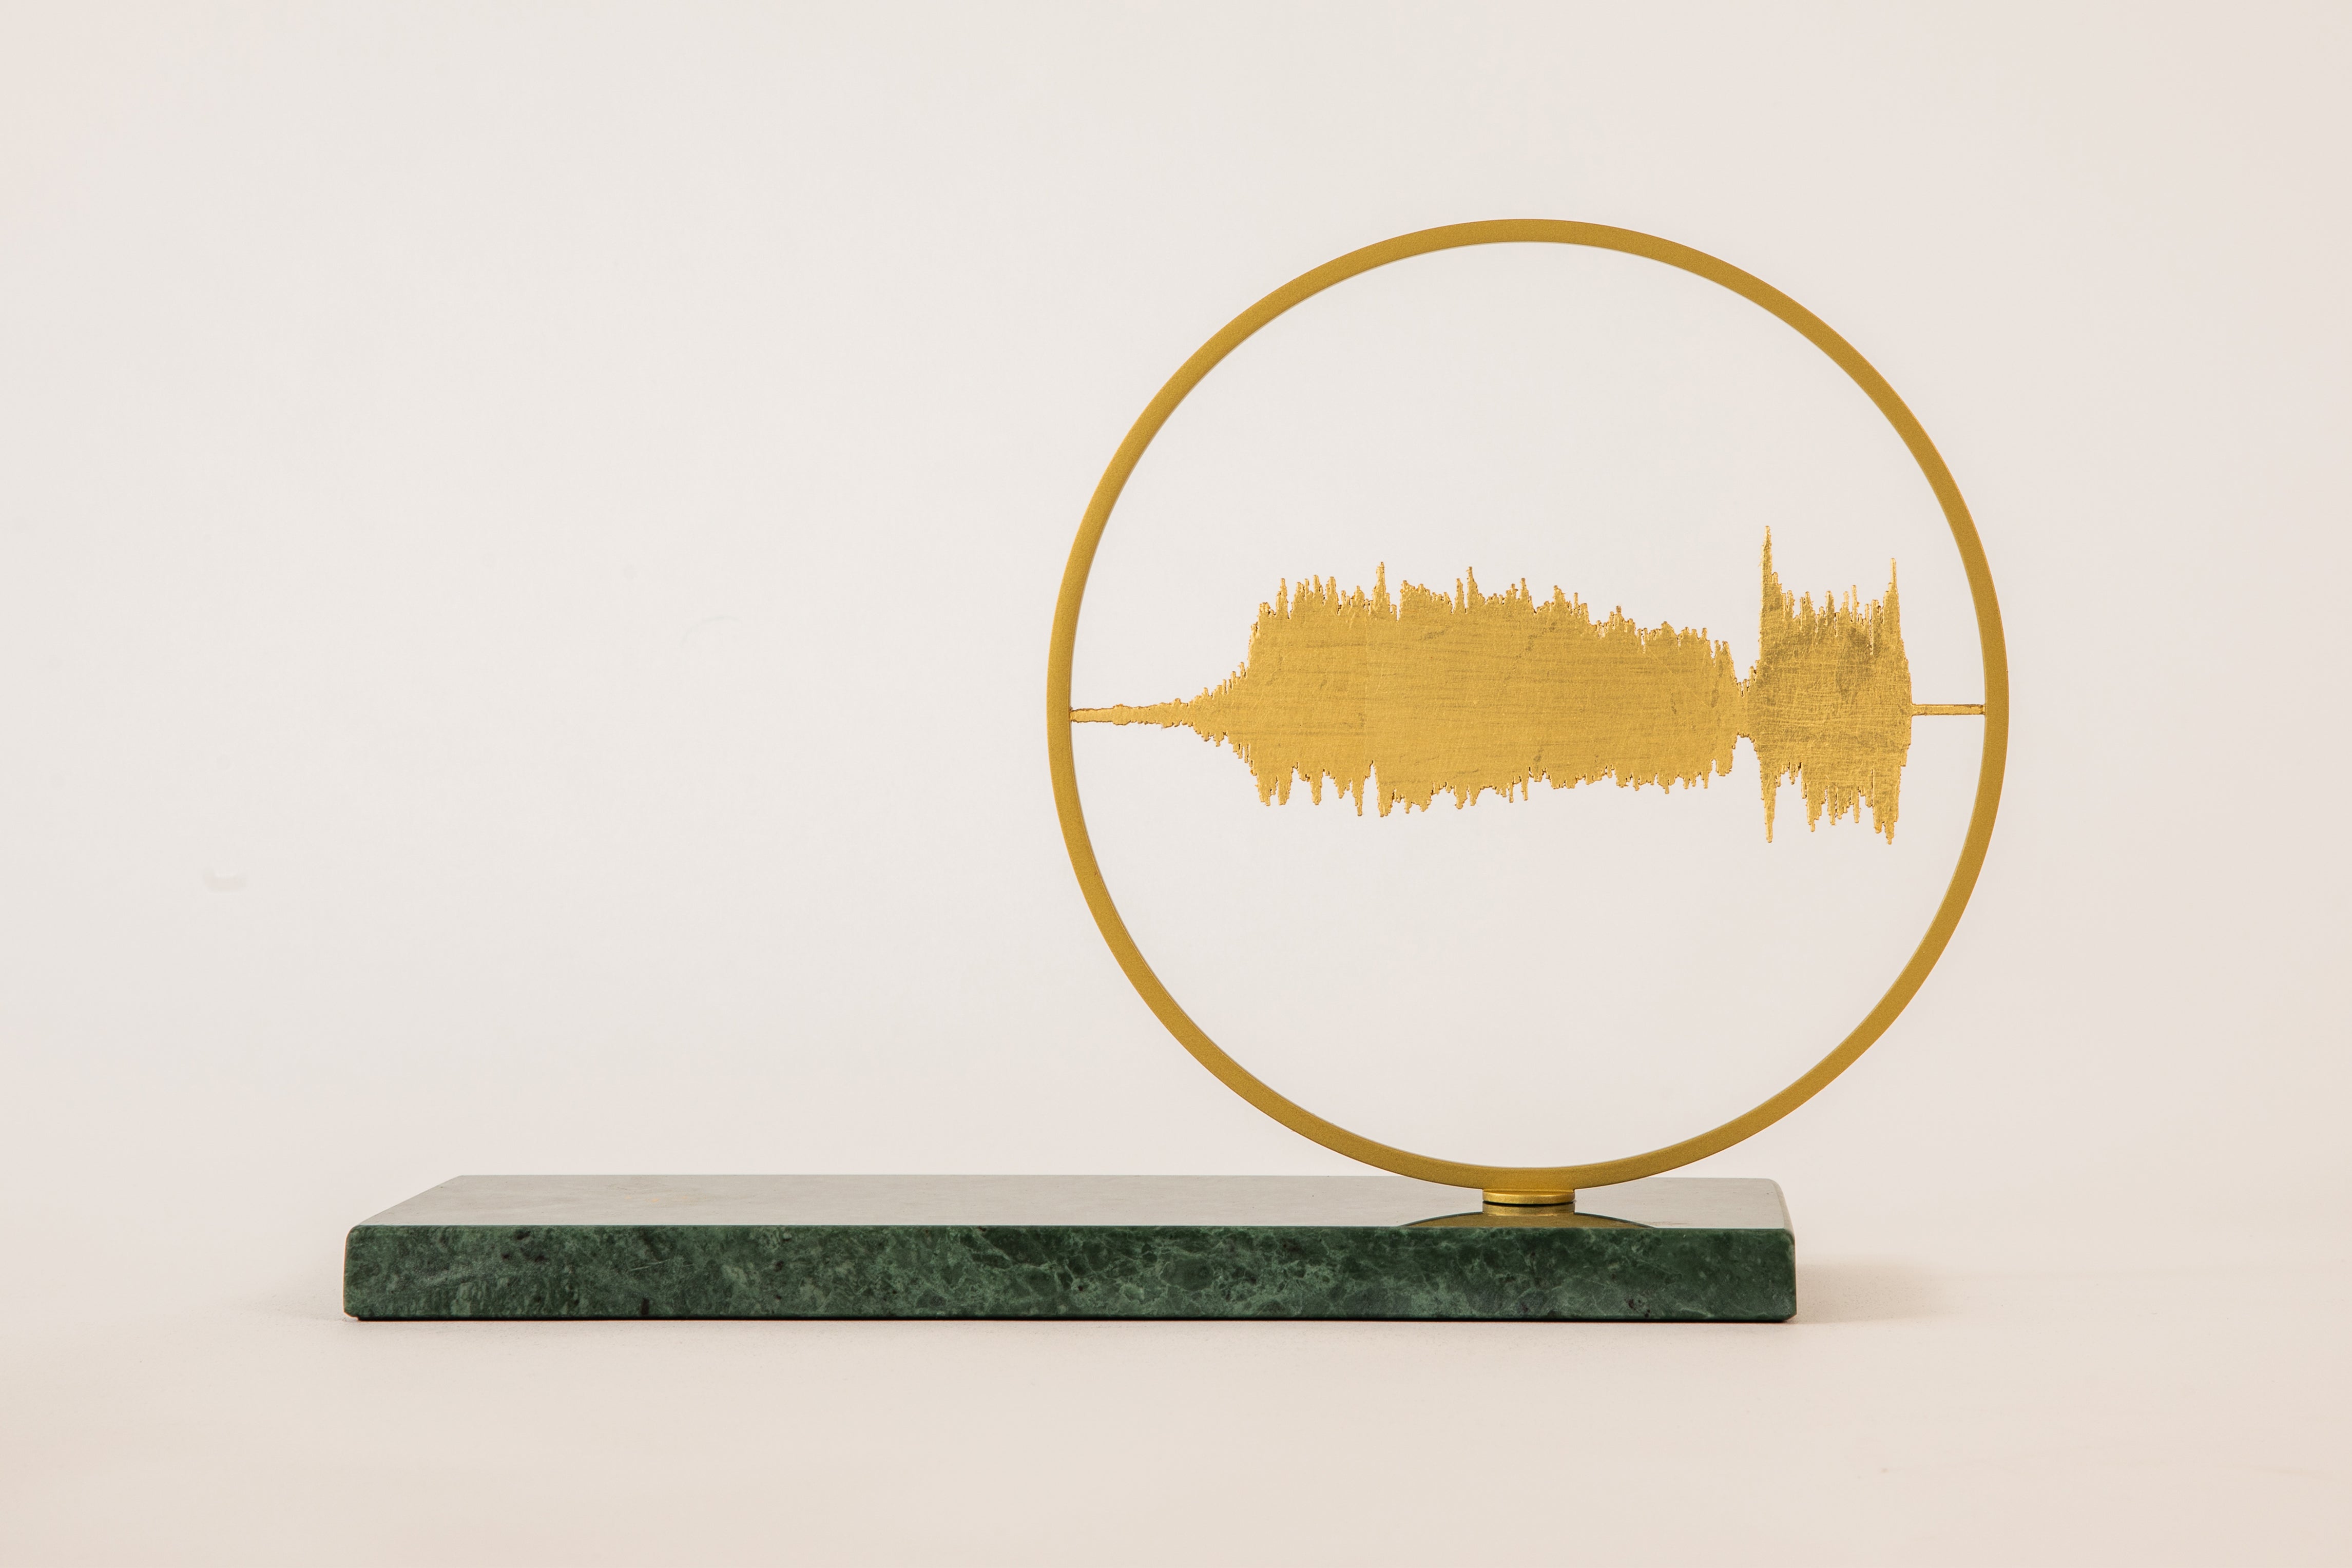 Ar-Rahman | 55:1 | Sound waves of the Holy Qura'an on Indian Green Marble Tajrid